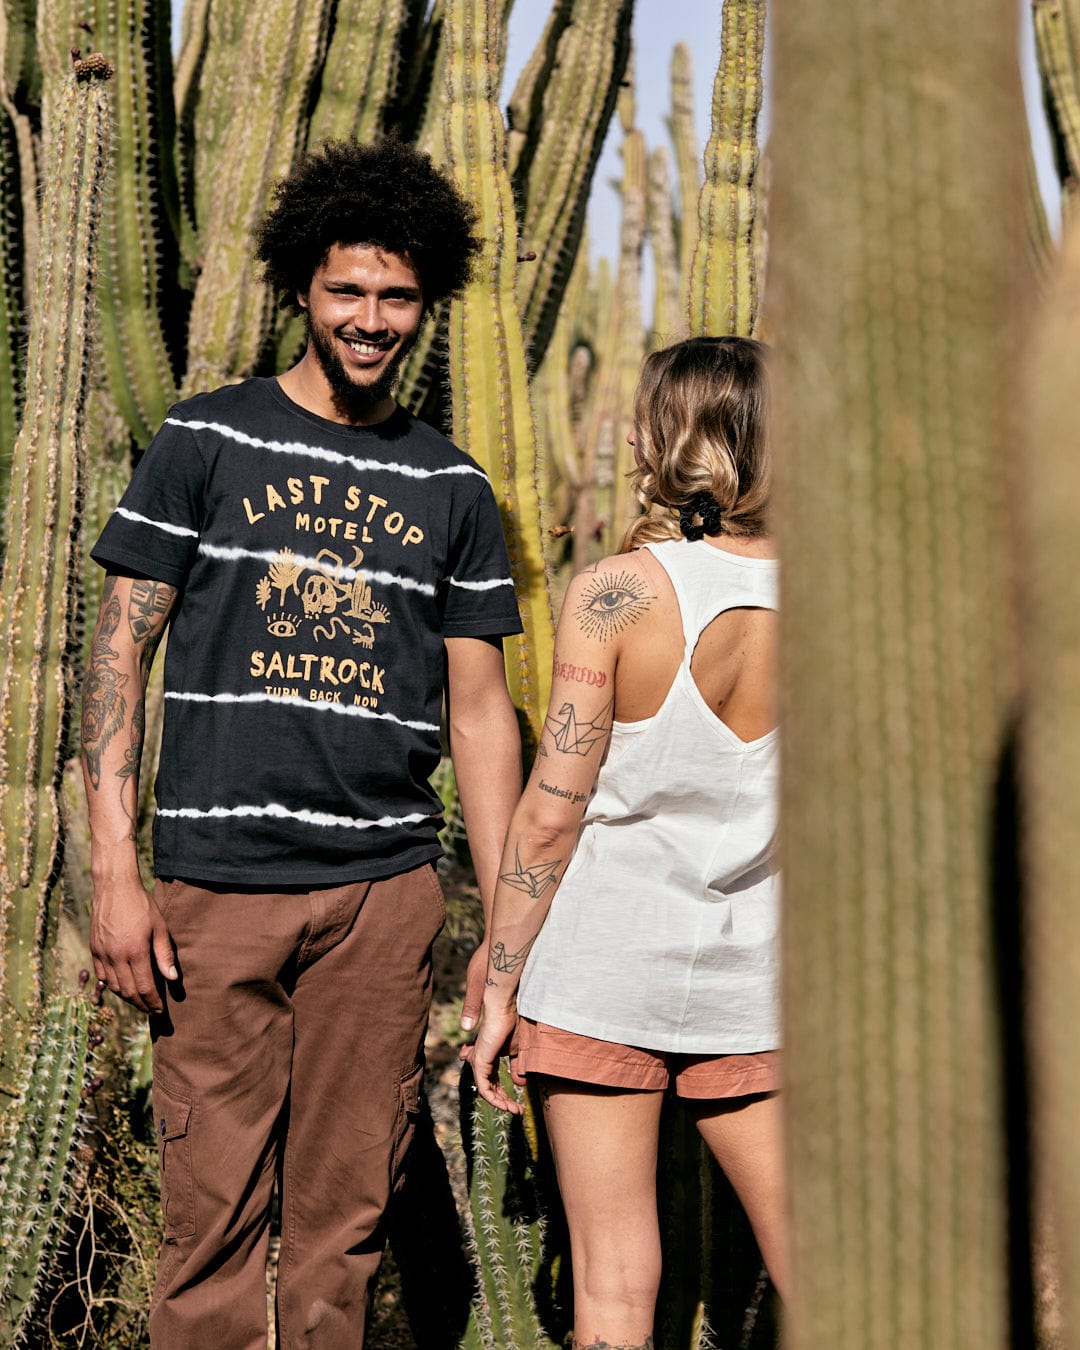 A man with curly hair wearing a crew neckline shirt and a woman with tattoos walking through a cactus field, engaging in conversation while the woman wears the Saltrock Palmera Womens Vest in White.